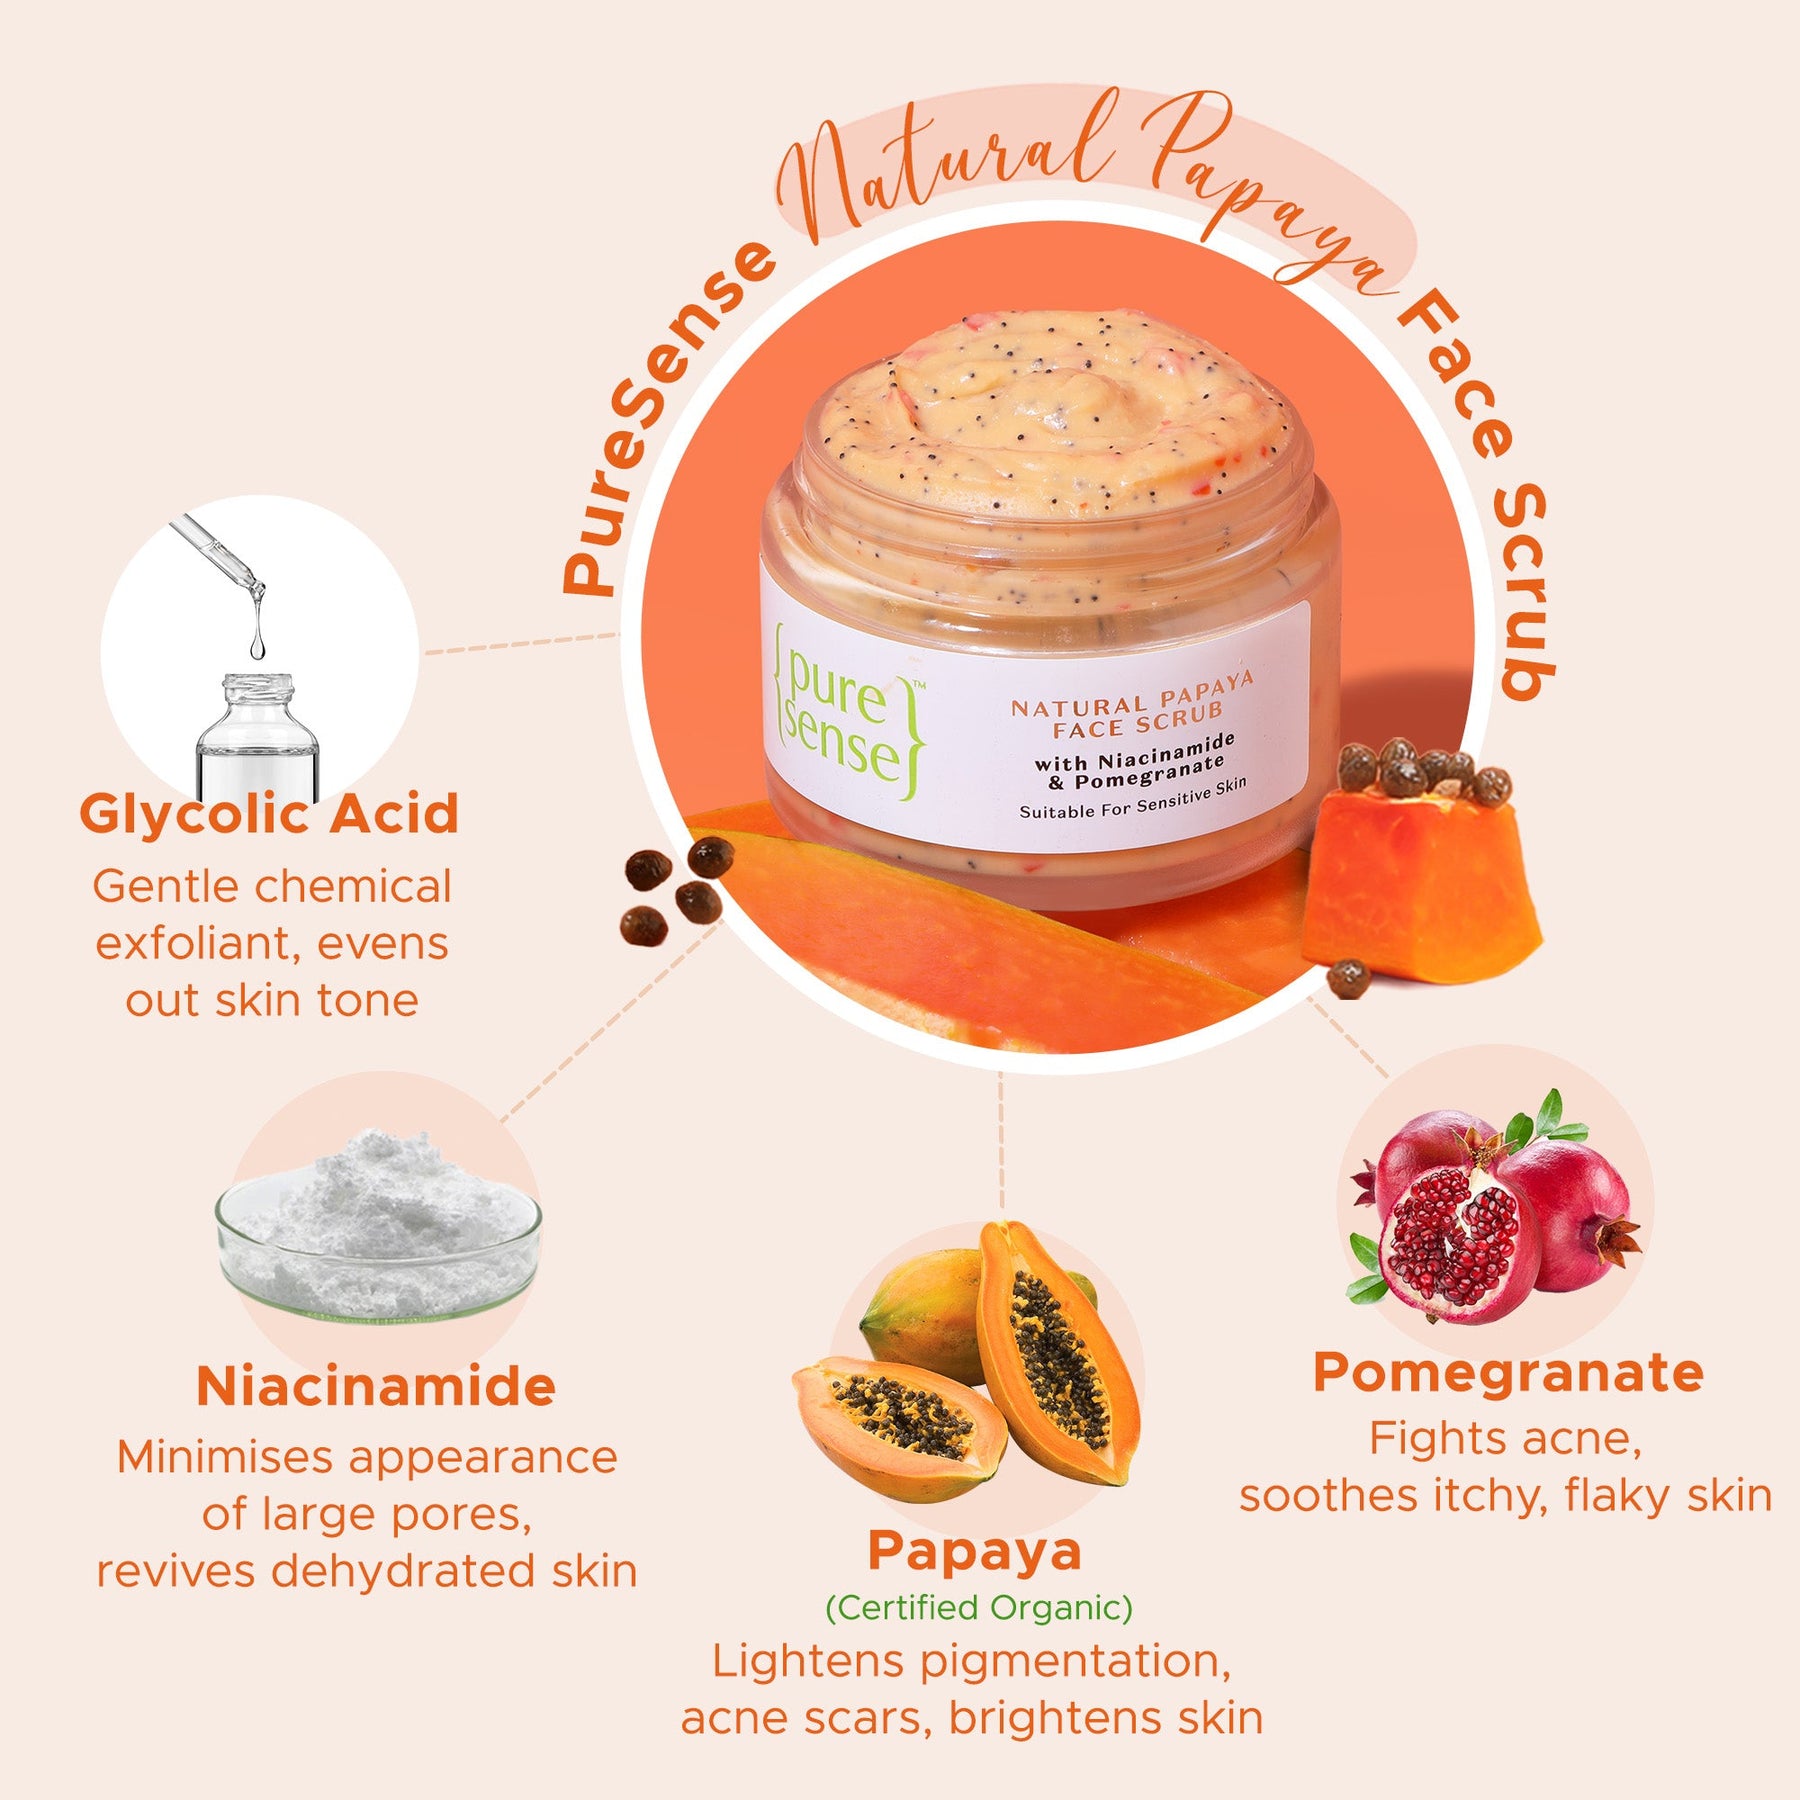 [CRED] Natural Papaya Face Scrub | Paraben & Sulphate Free | From the makers of Parachute Advansed | 50g